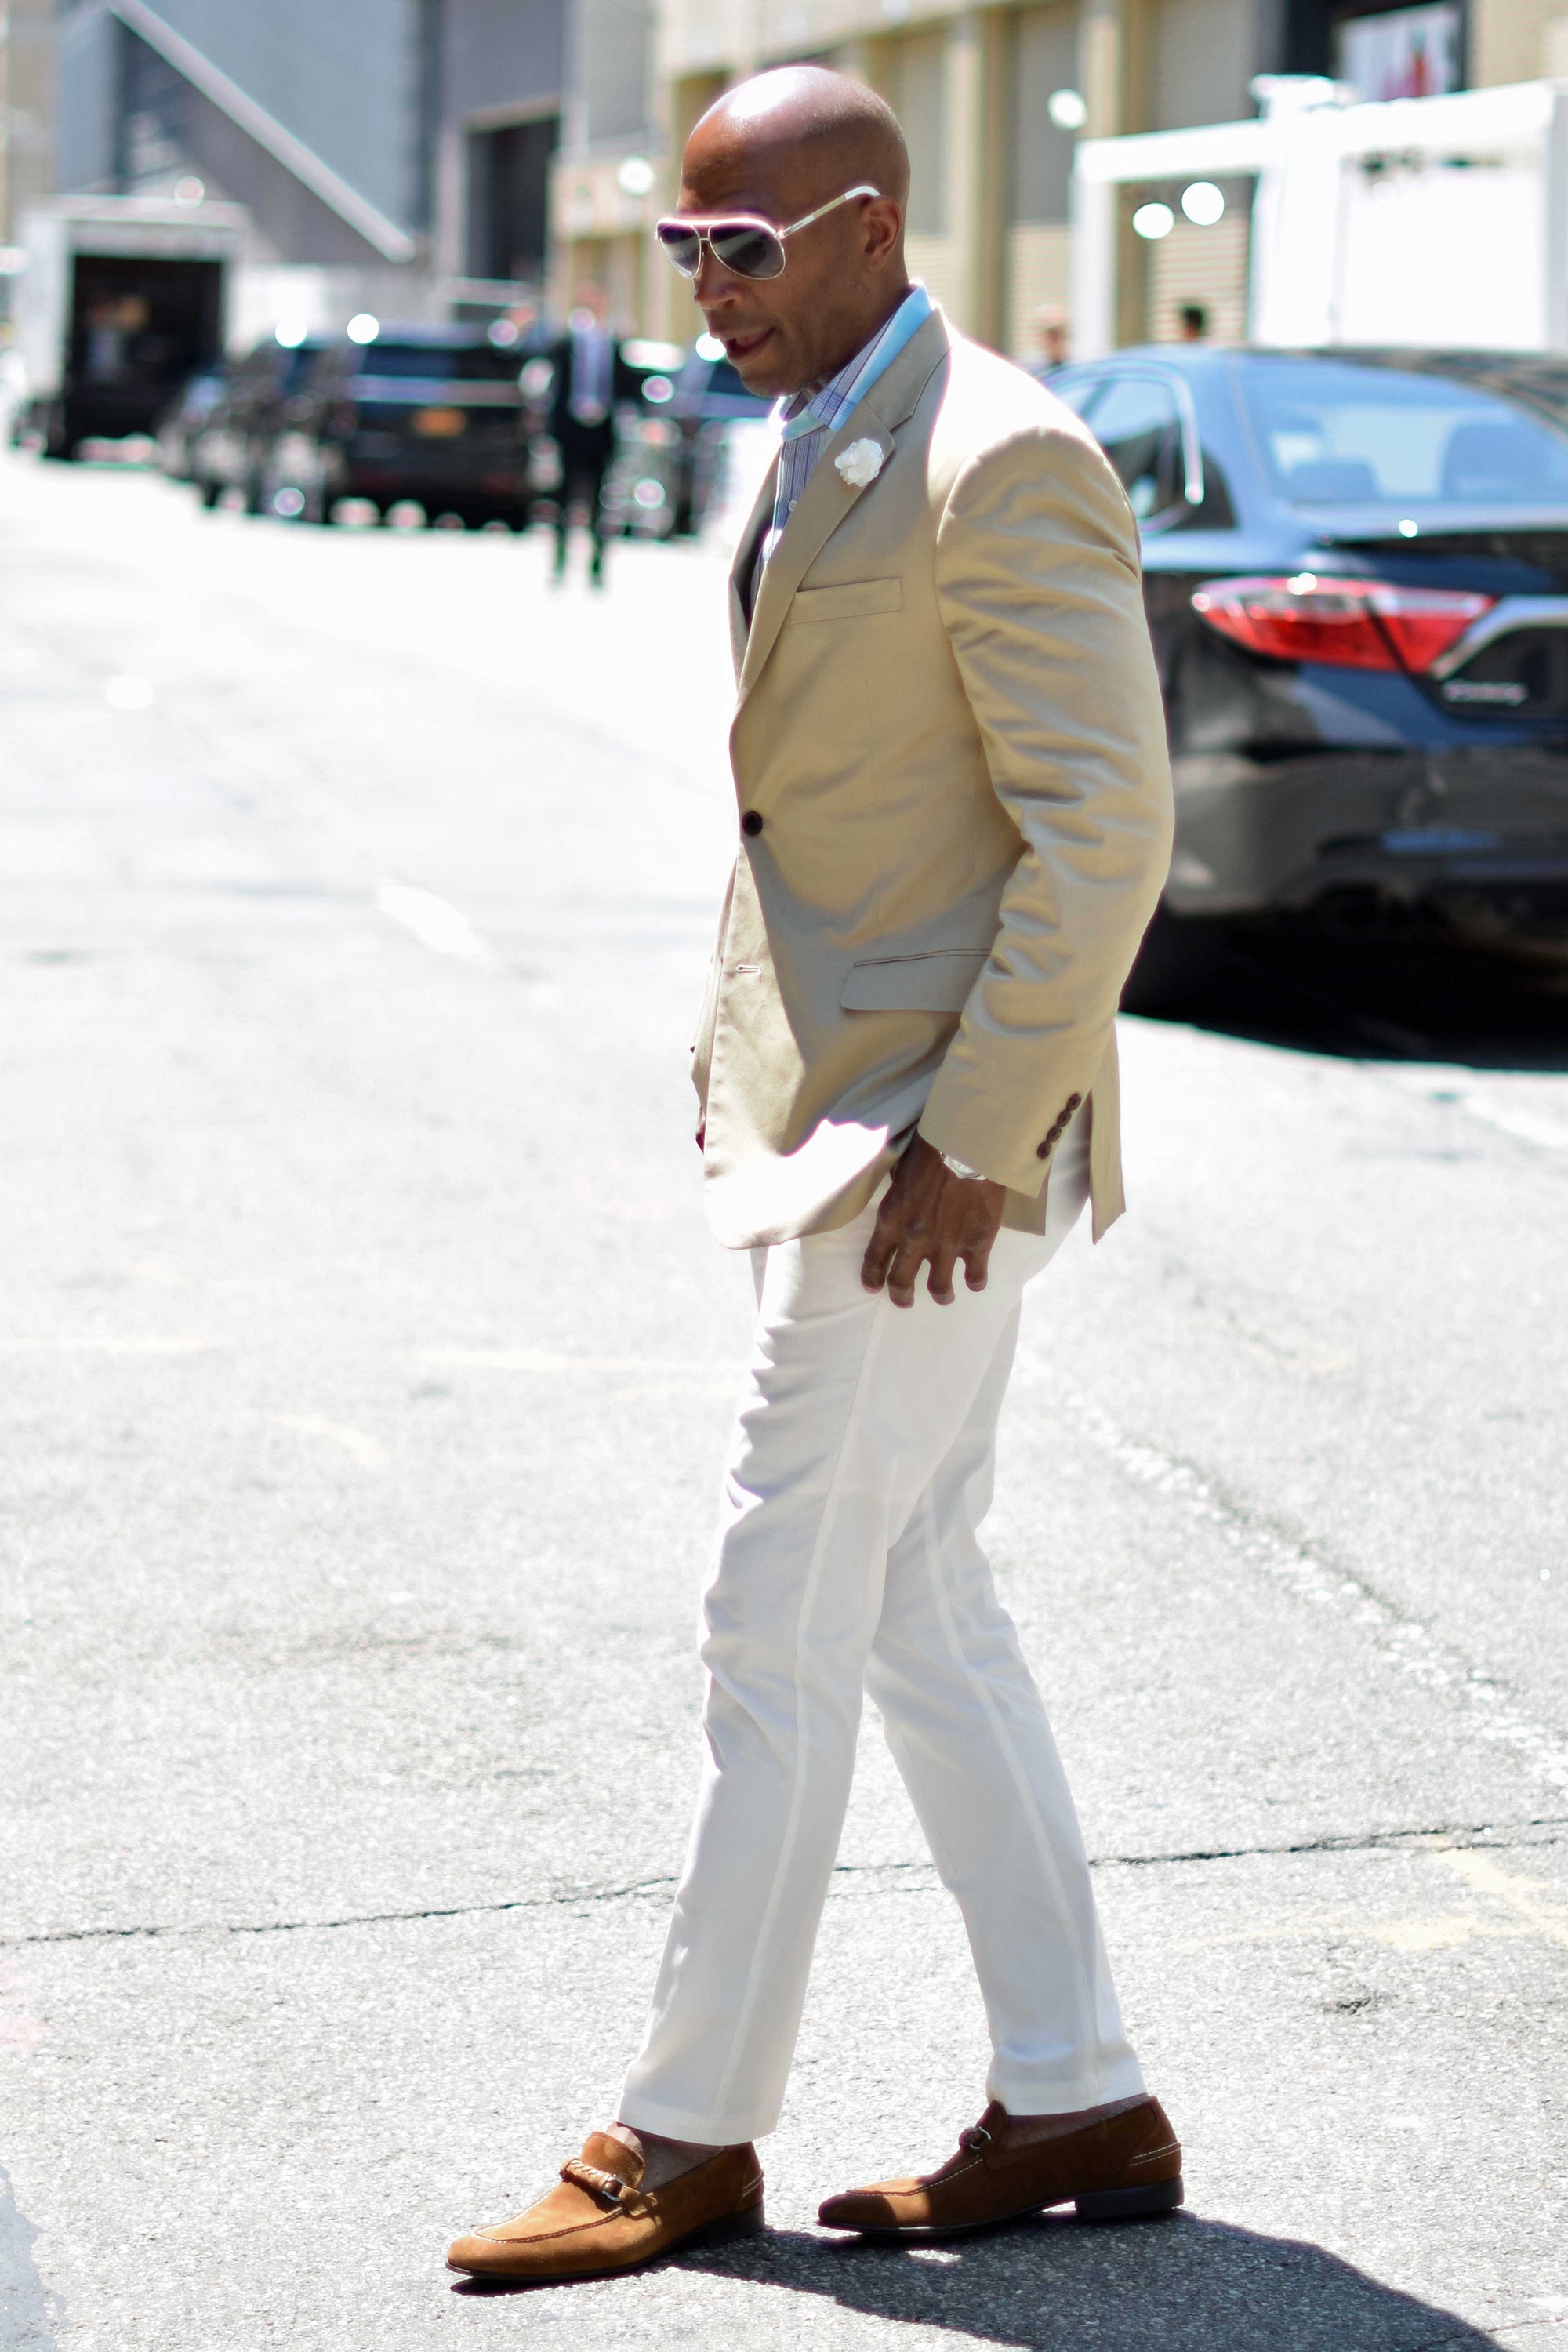 It was hot in NYC but I stayed cool - The DCFashion Fool